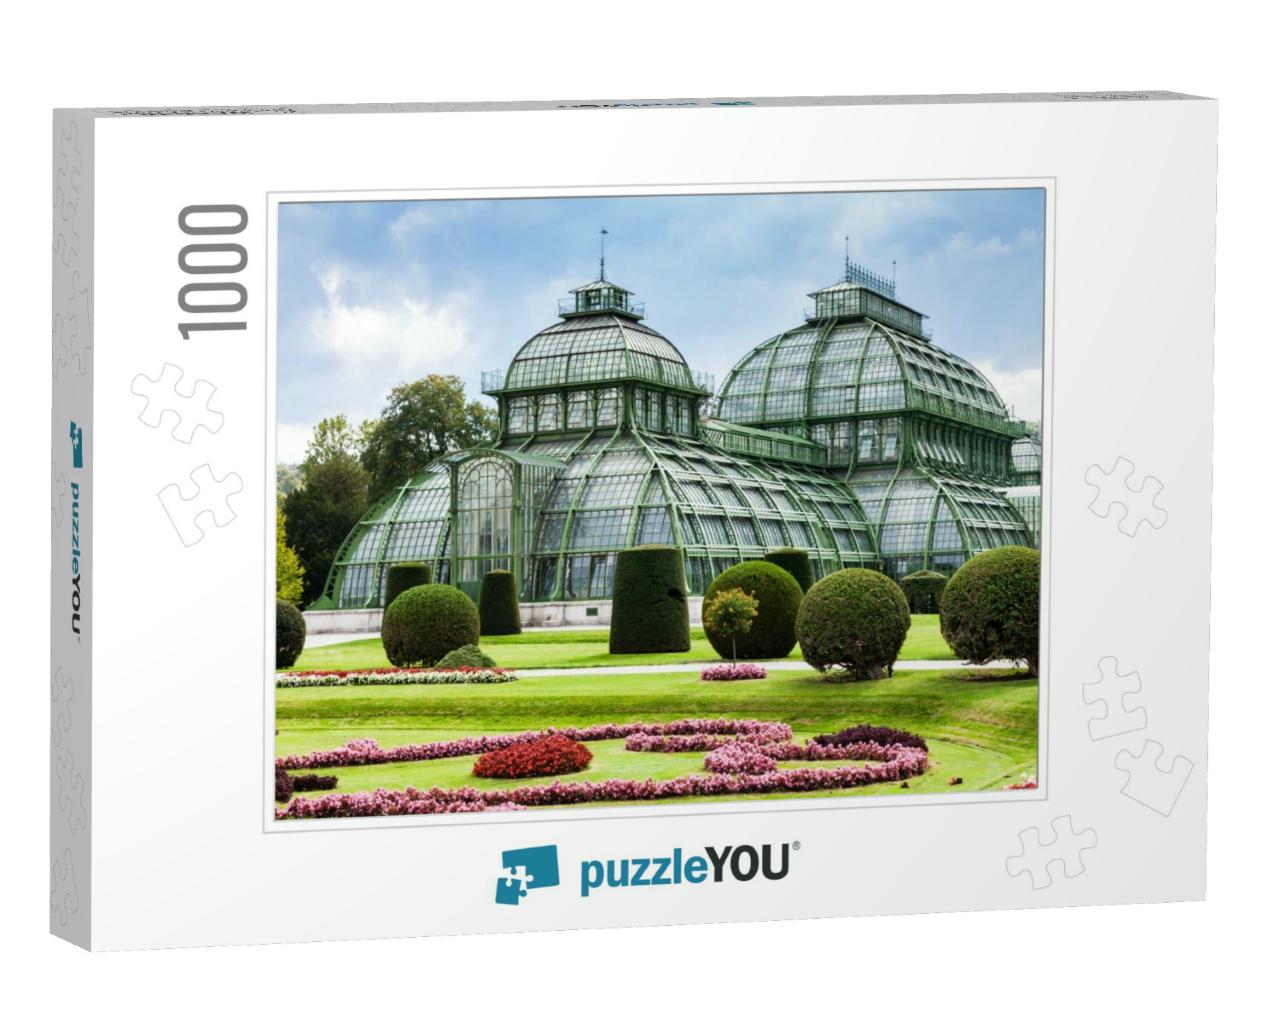 Travel to Vienna City - Palm House, Large Greenhouse in G... Jigsaw Puzzle with 1000 pieces